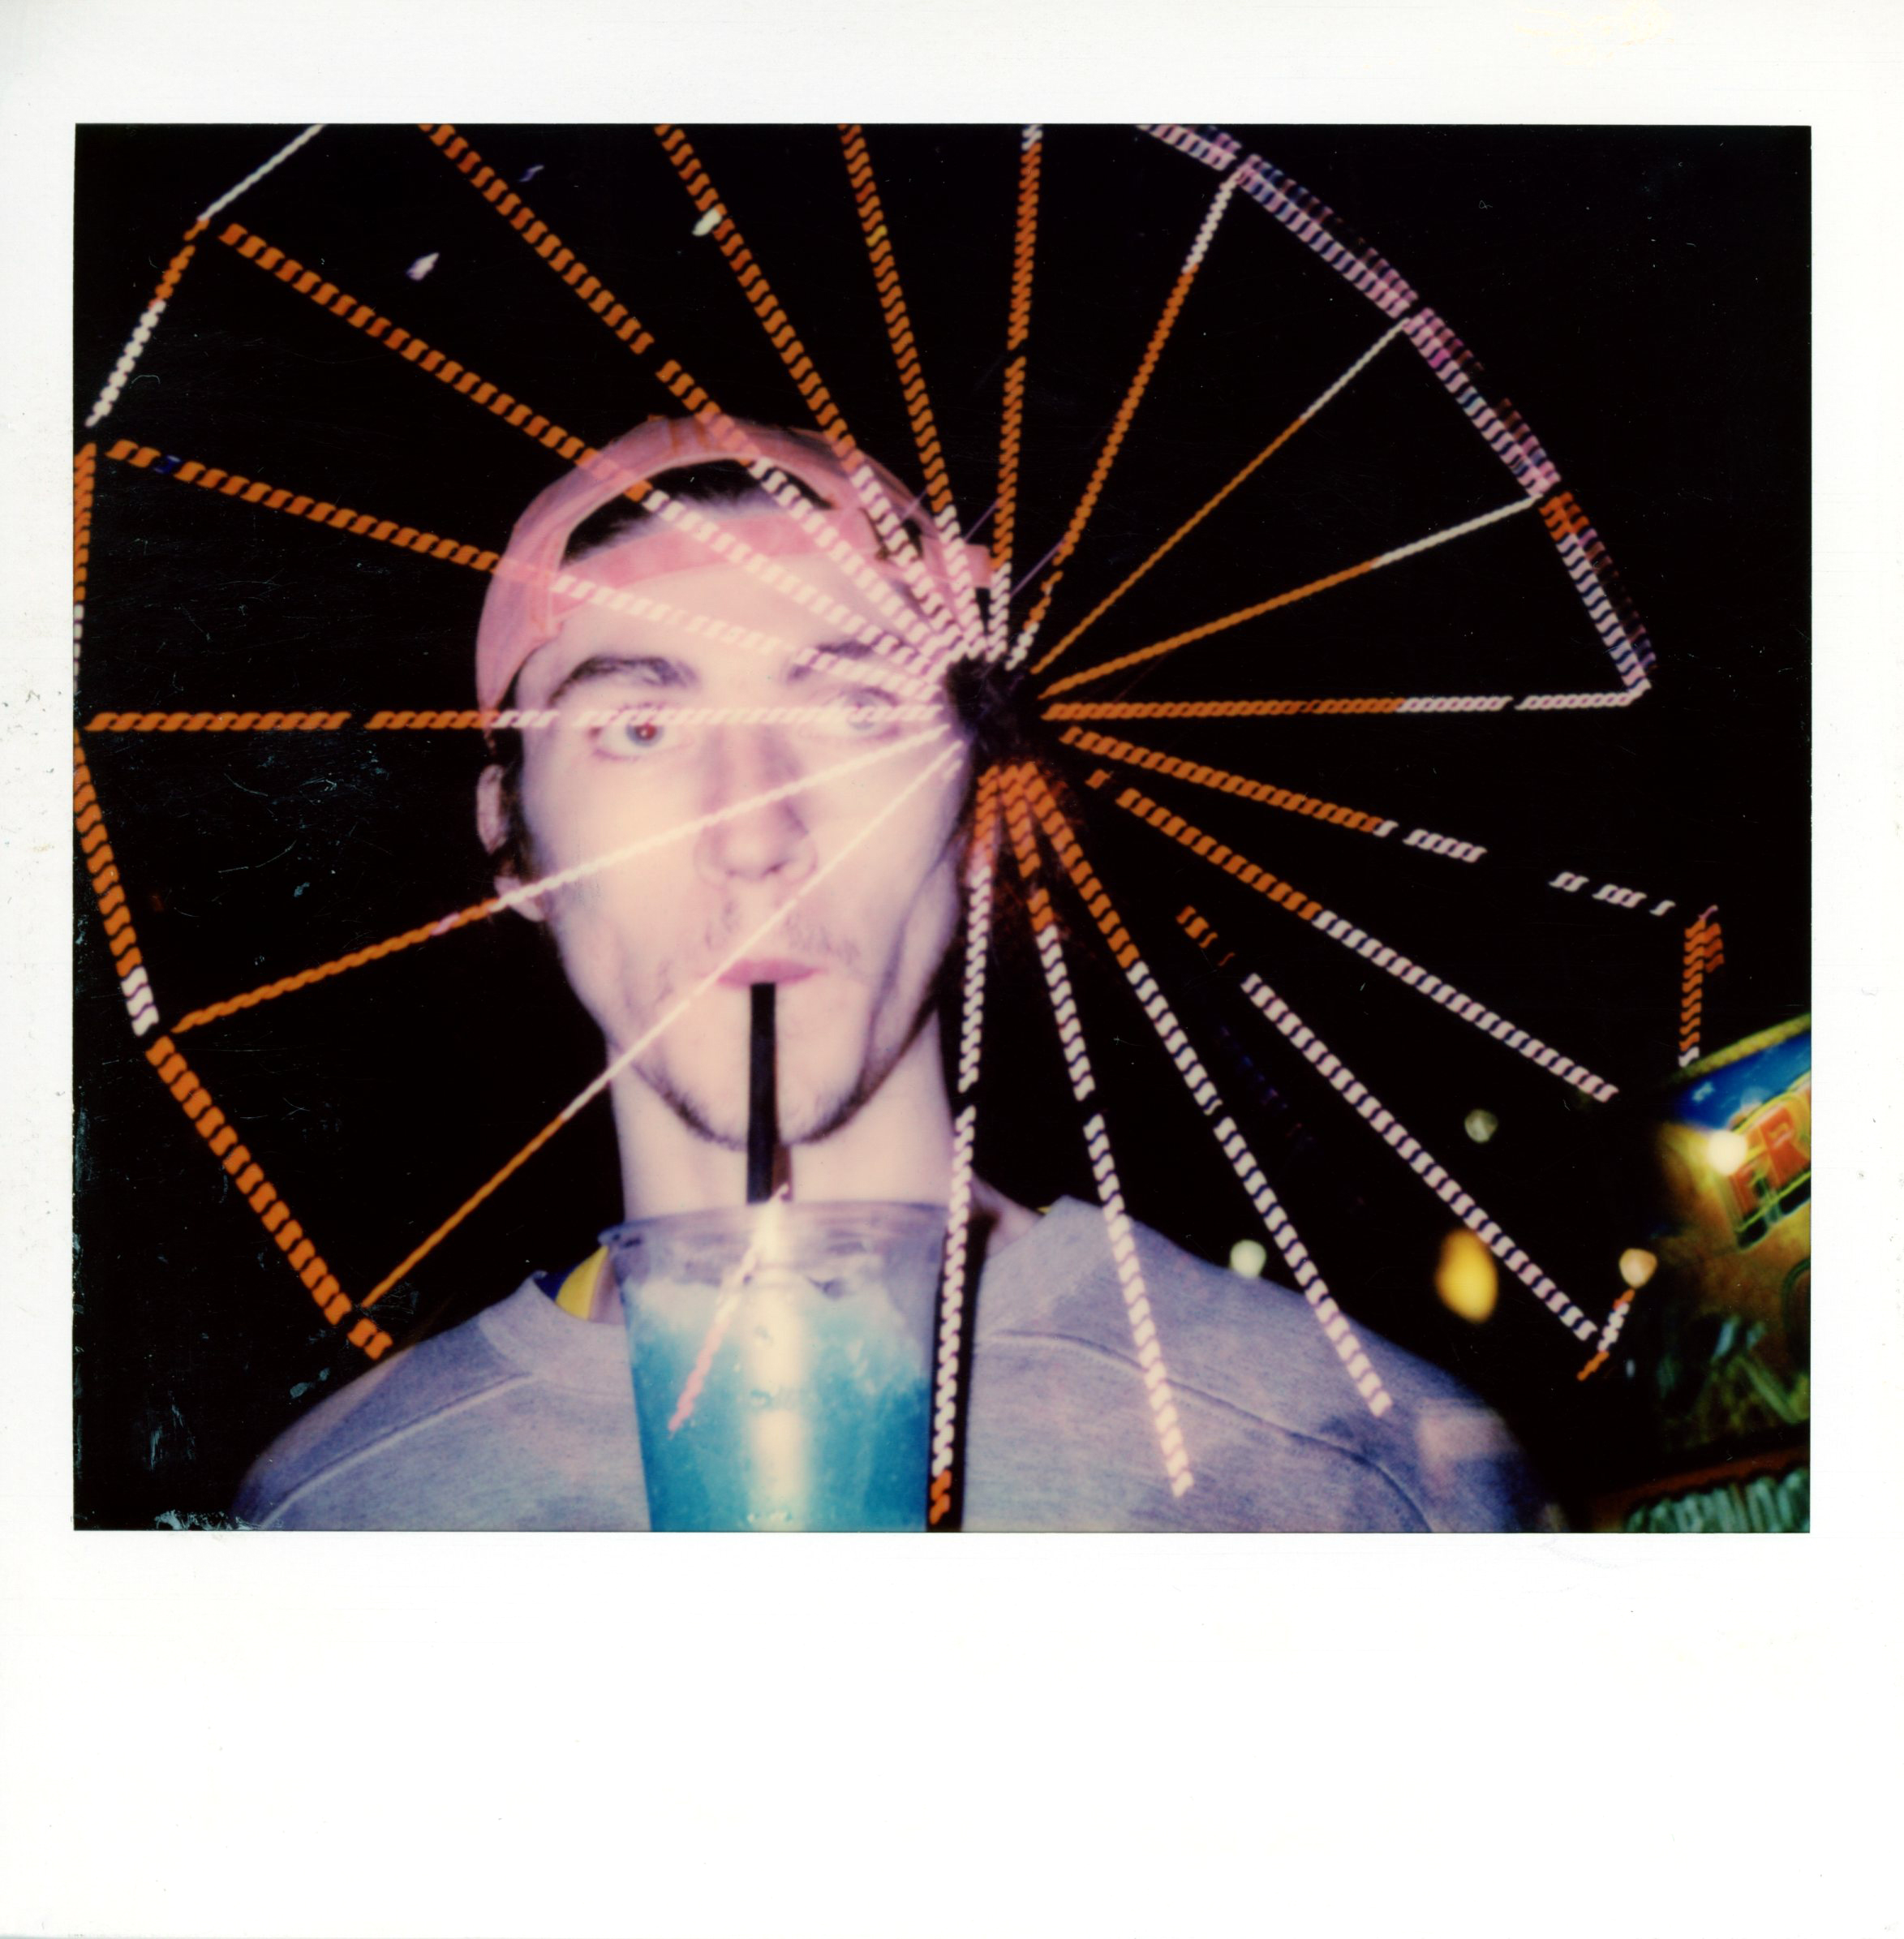 Brian Hurley (Double Exposure) - Camp Flog Gnaw, Los Angeles - 2017